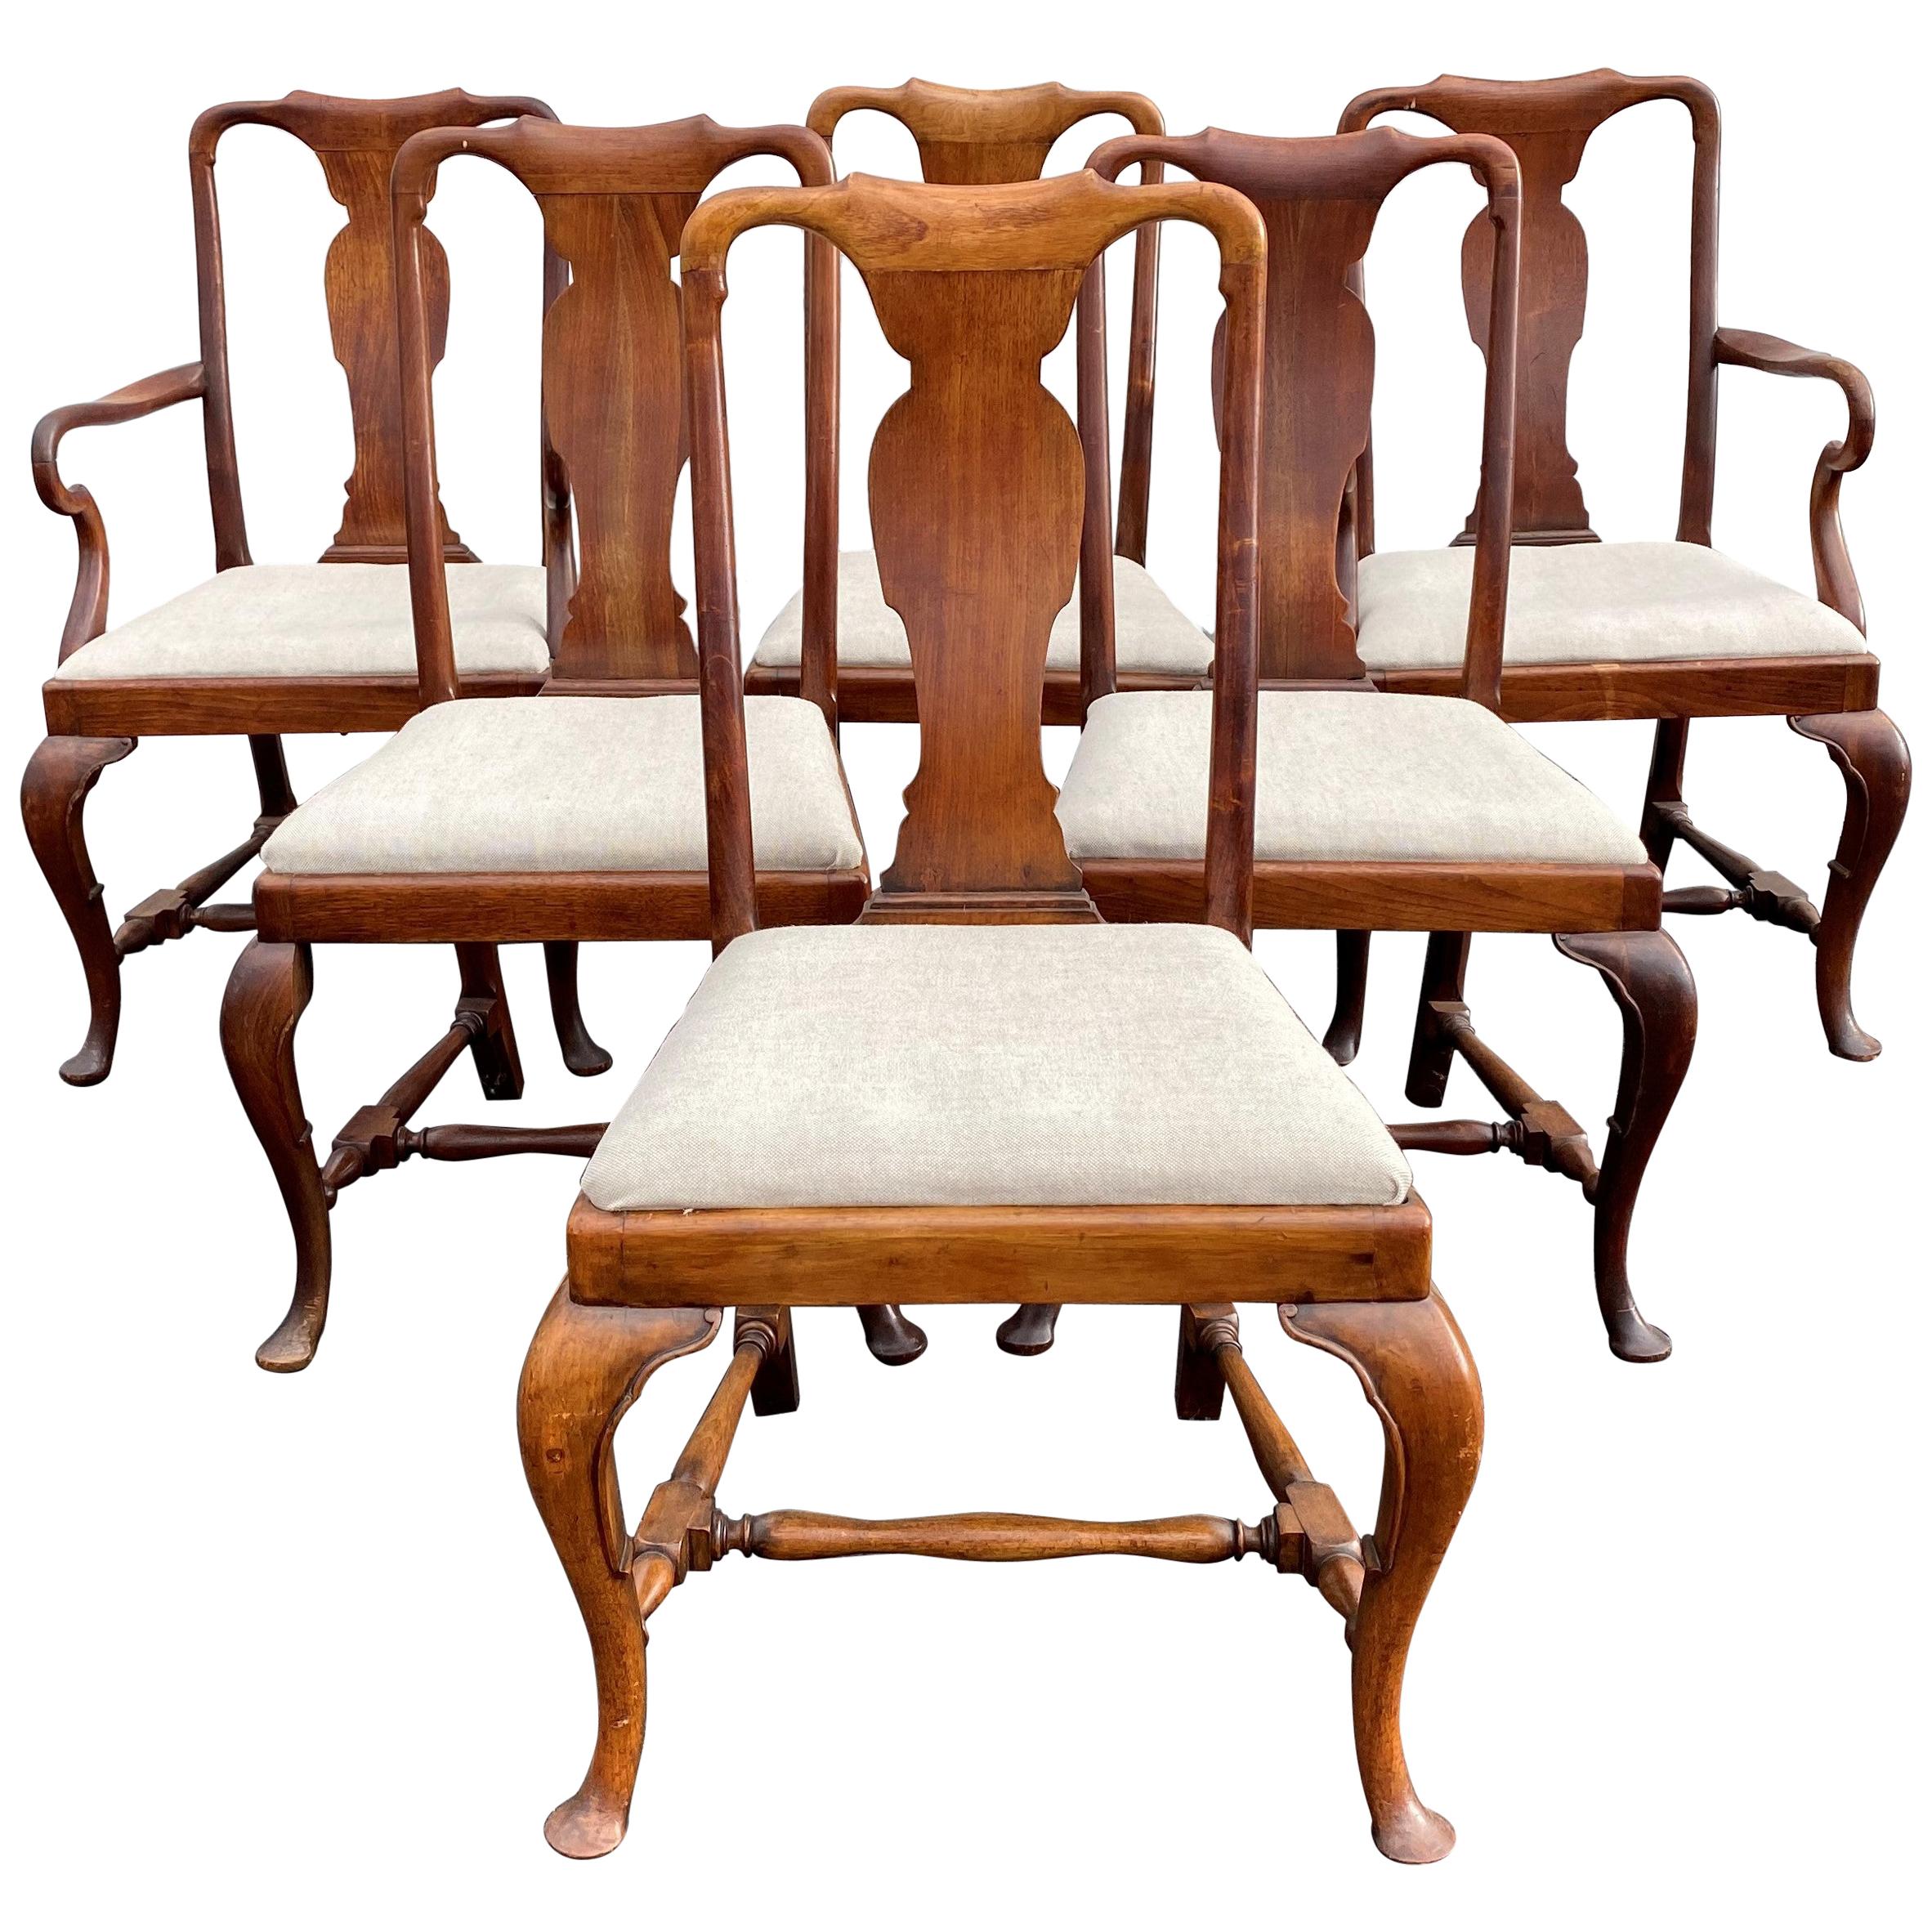 Set of Six 19th-20th Century Queen Anne Style Mahogany Dining Chairs